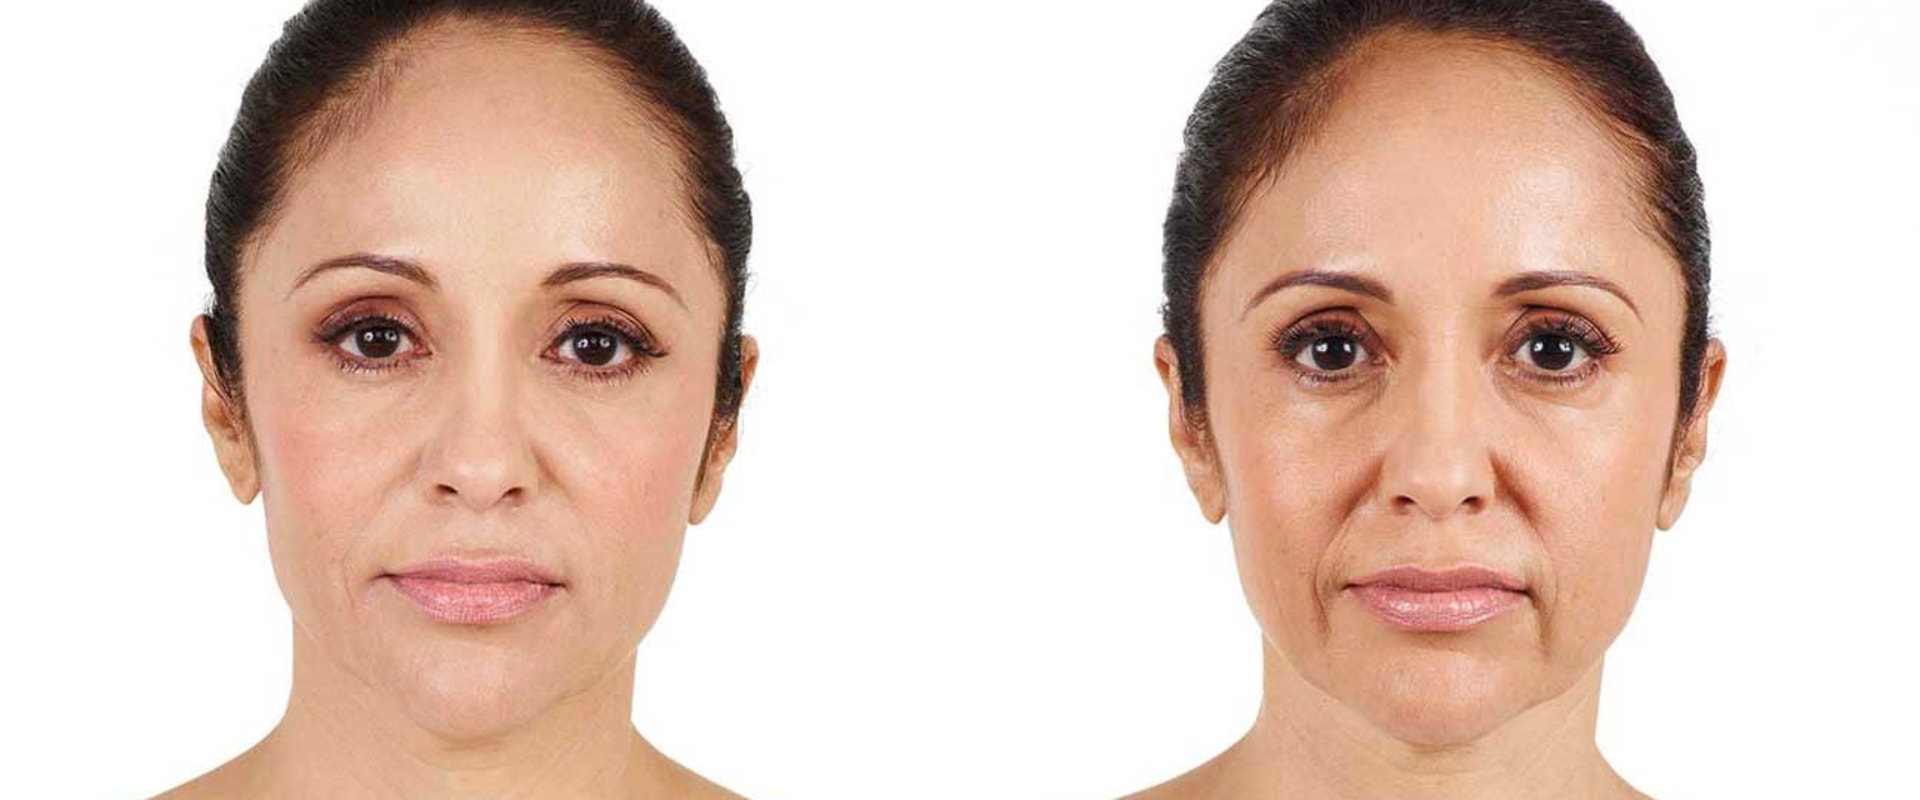 Why is juvederm bad?